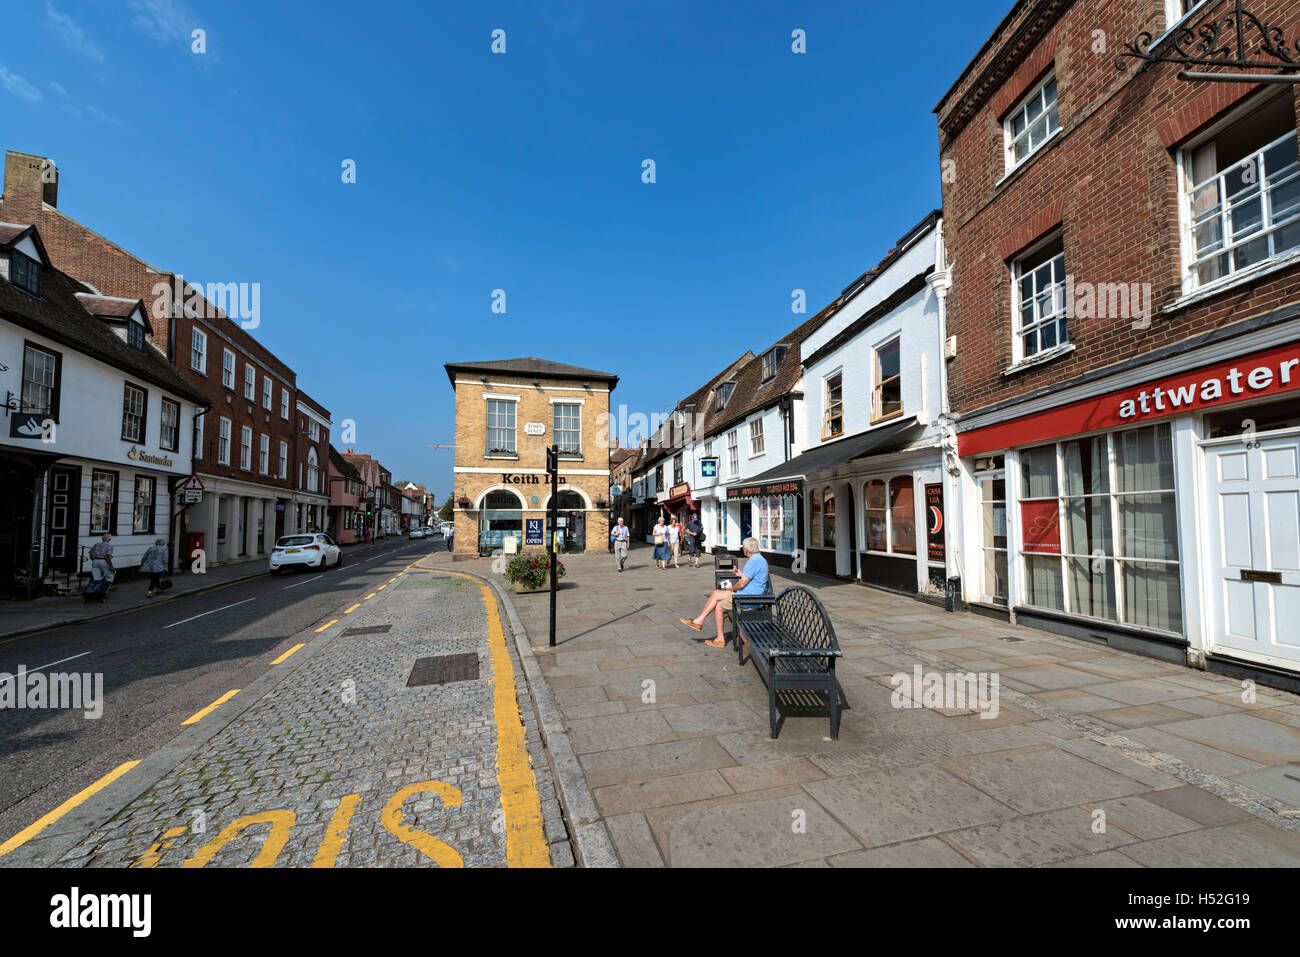 Looking towards Town Hall, High Street, Ware, Hertfordshire Stock Photo